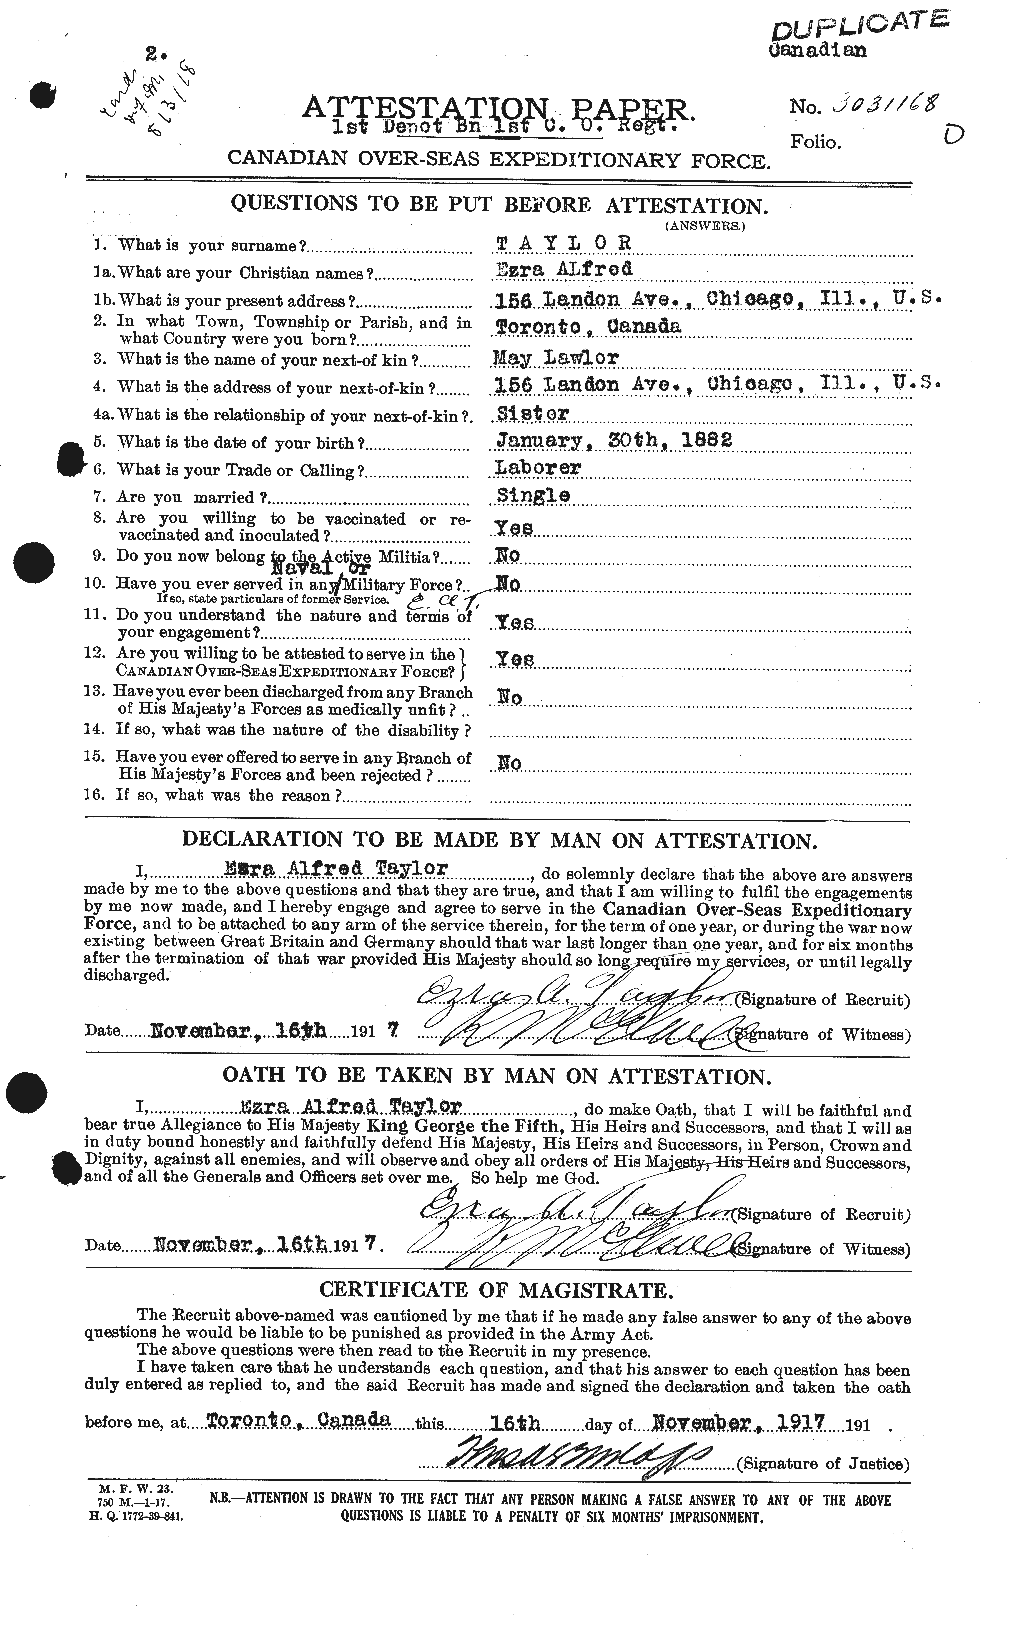 Personnel Records of the First World War - CEF 627413a